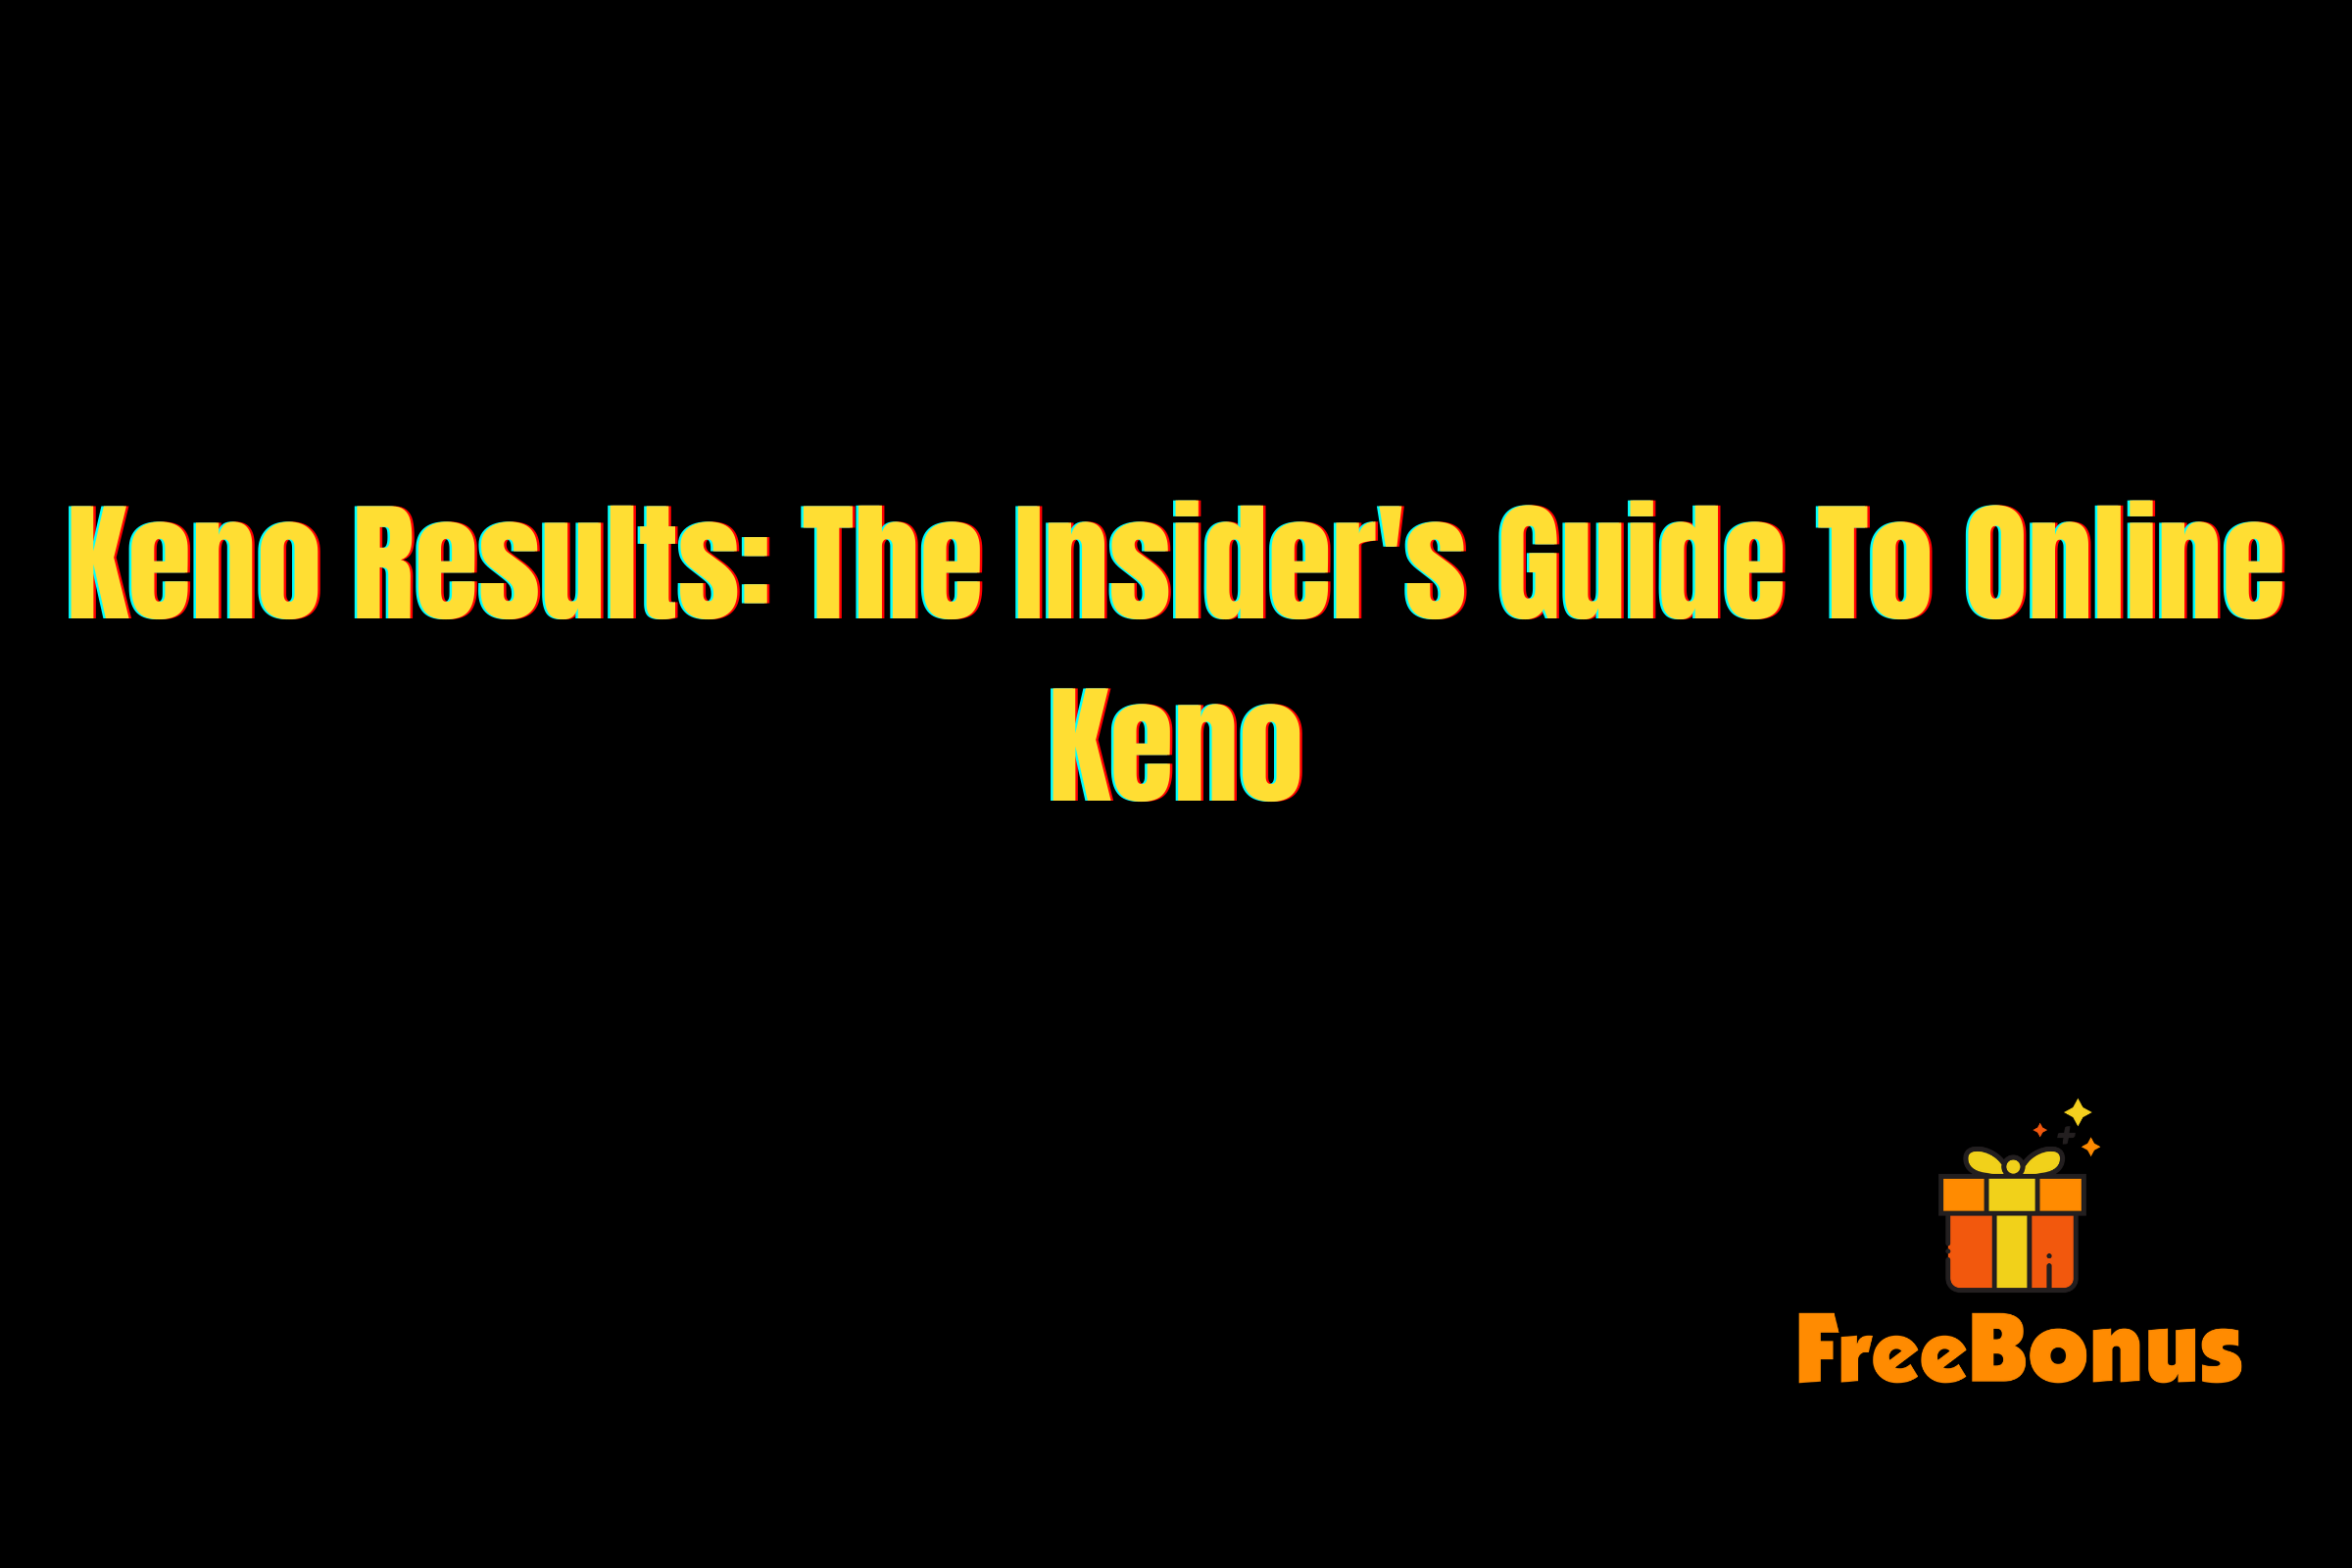 Keno Results: The Insider's Guide To Online Keno